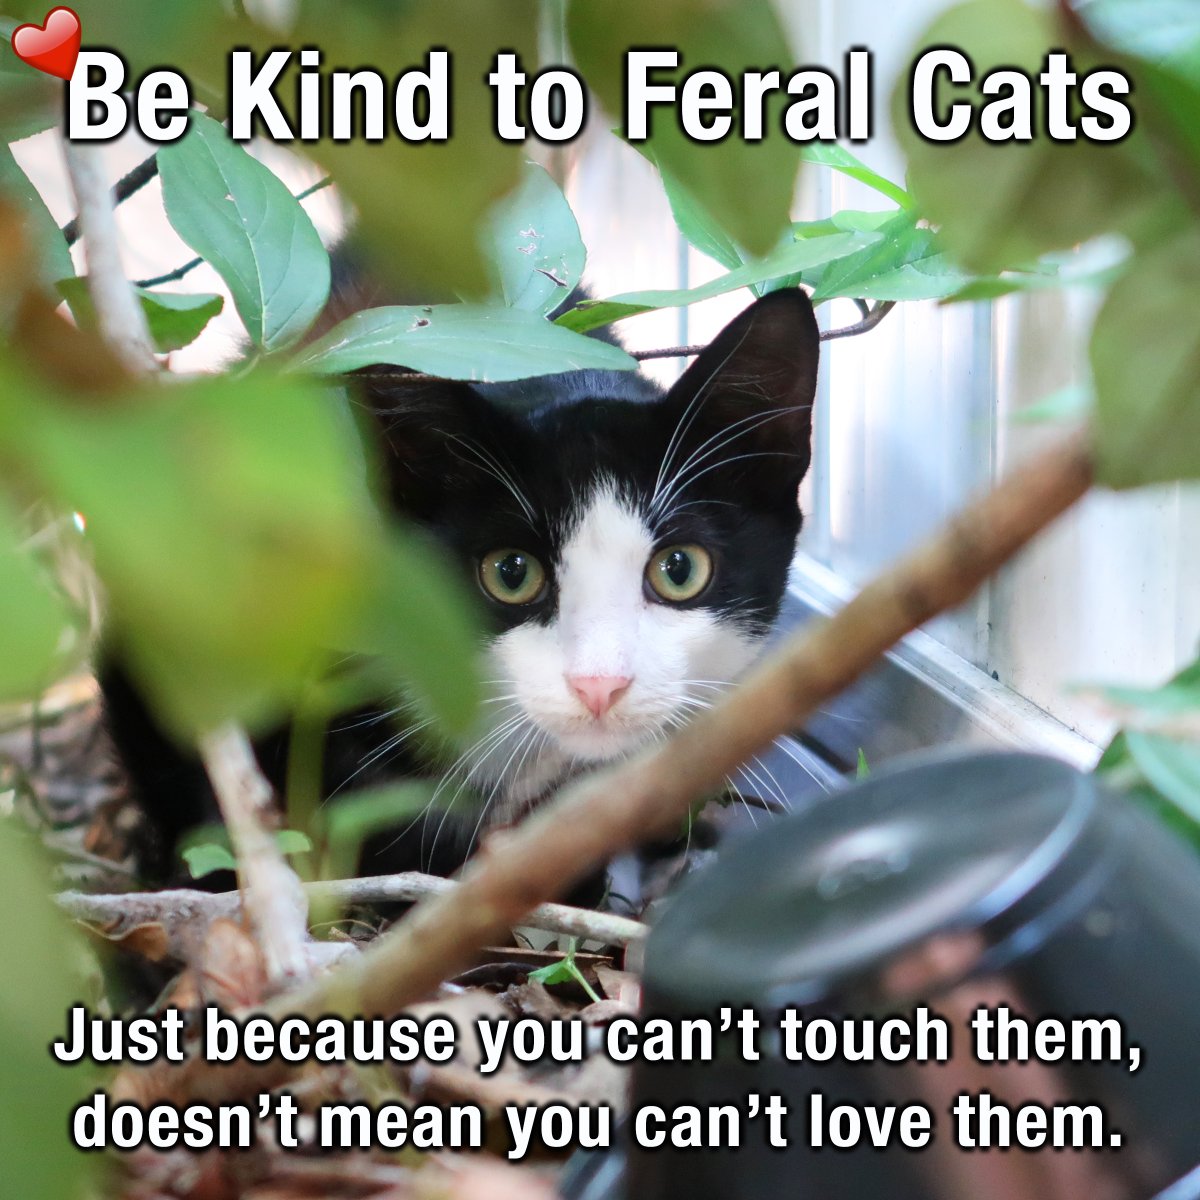 Happy National Feral Cat Day! ❤

How many others care for community cats out there?
Share pics!

#FeralCatDay #NationalFeralCatDay #CommunityCats #GlobalCatDay